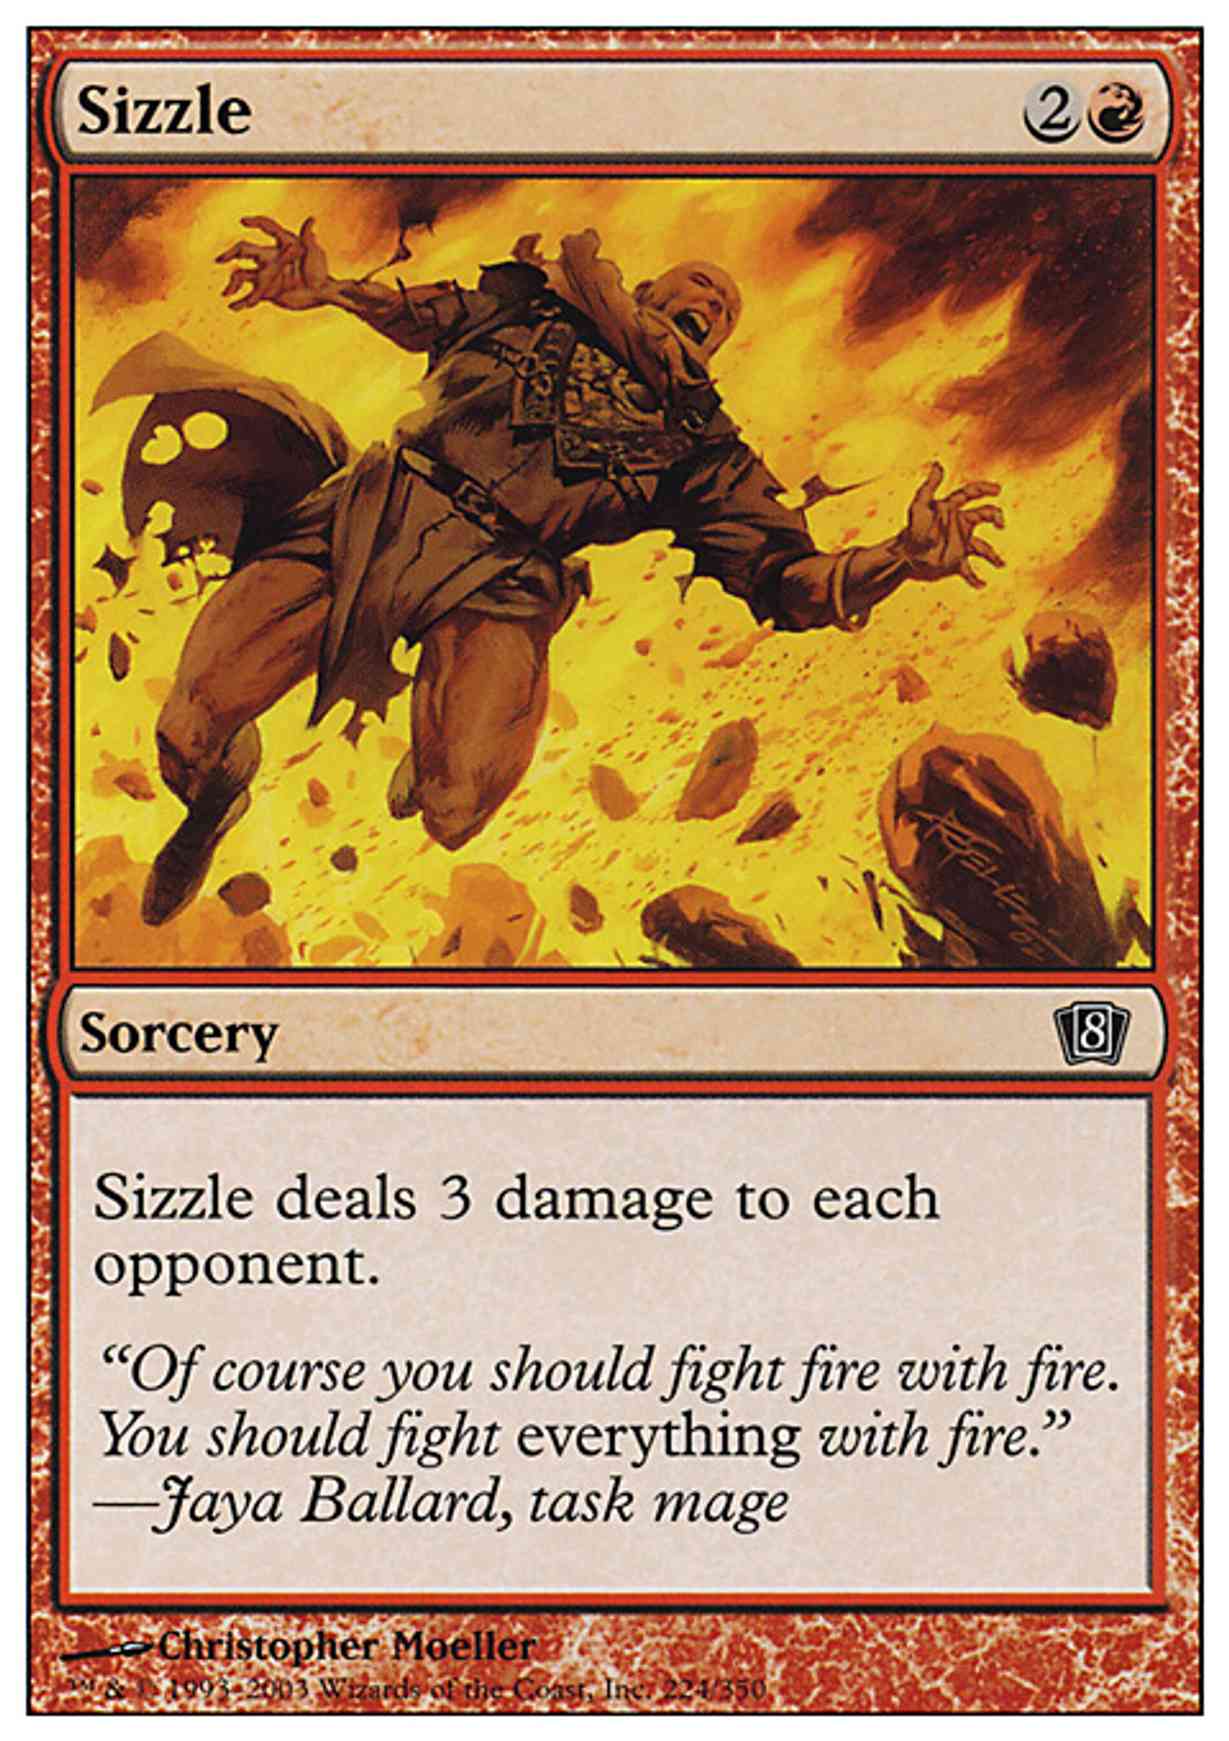 Sizzle magic card front